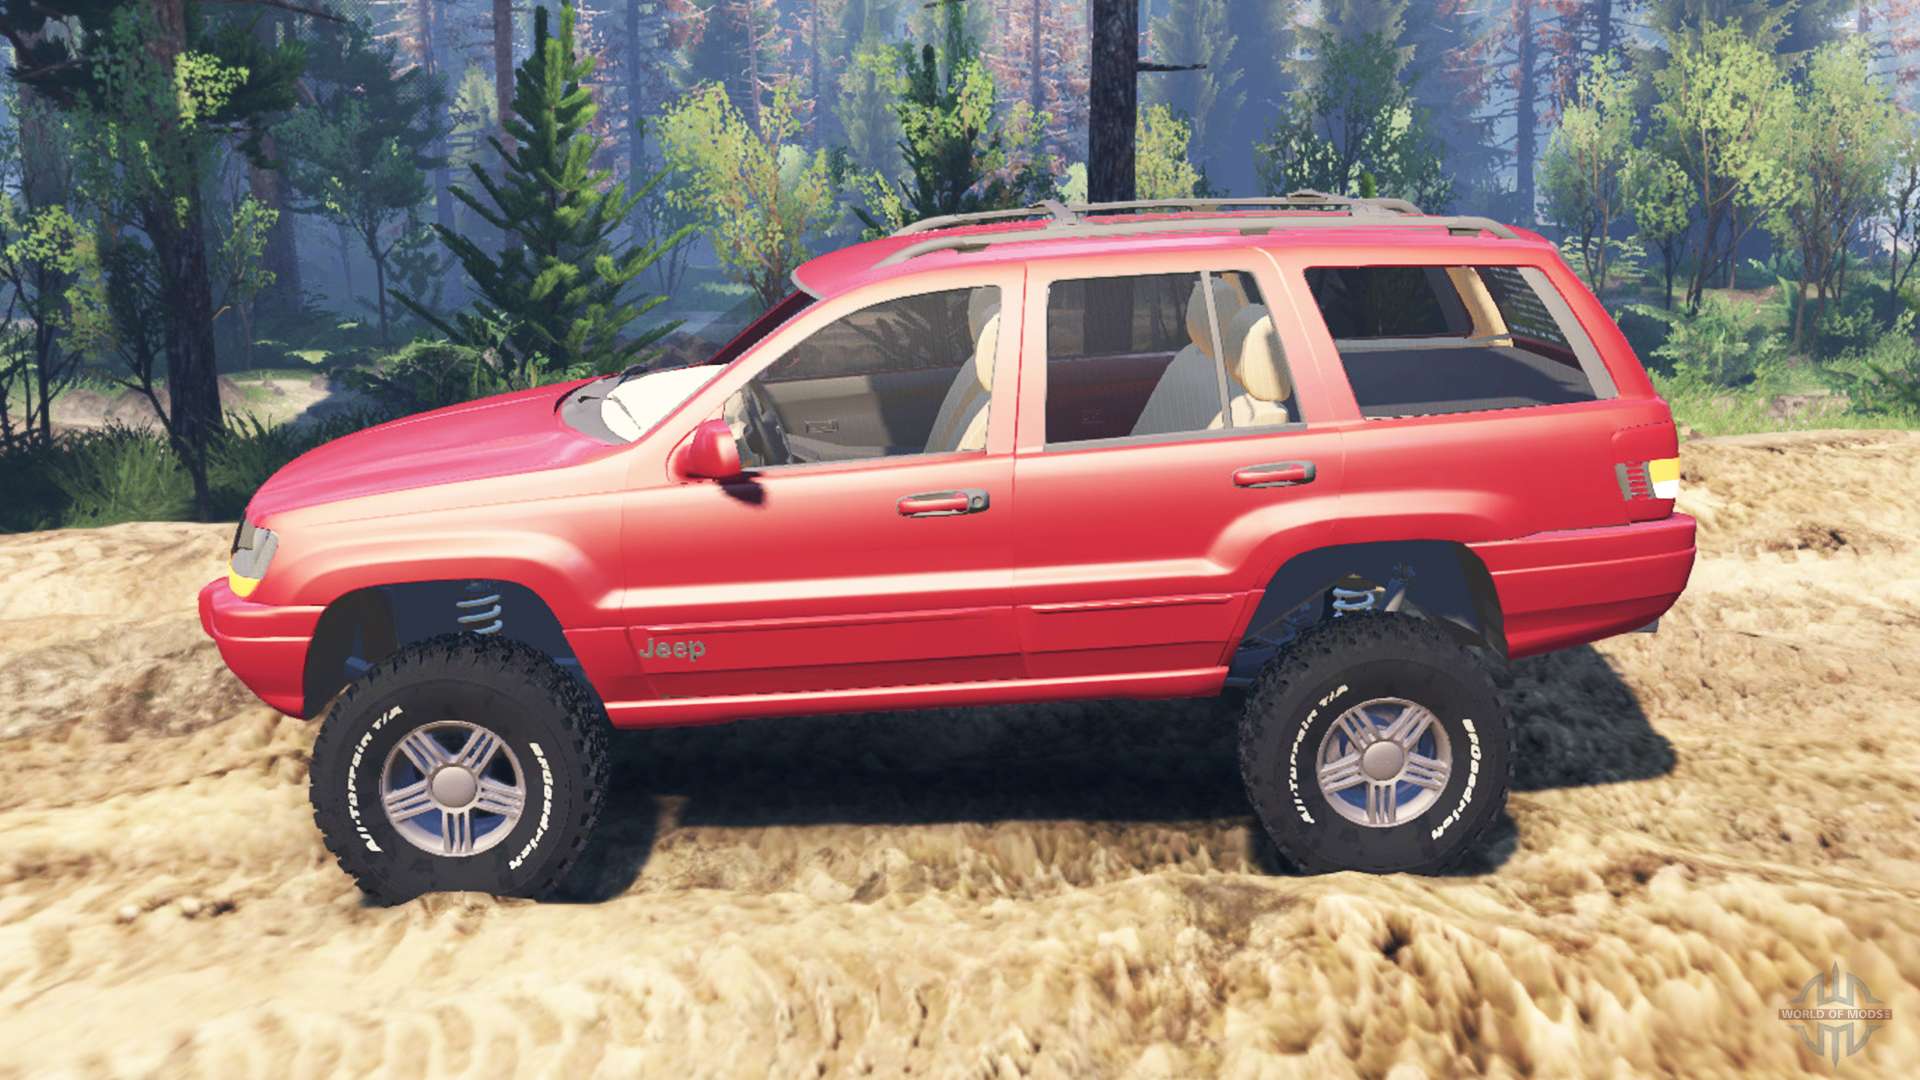 Jeep Grand Cherokee (WJ) v2.0 for Spin Tires